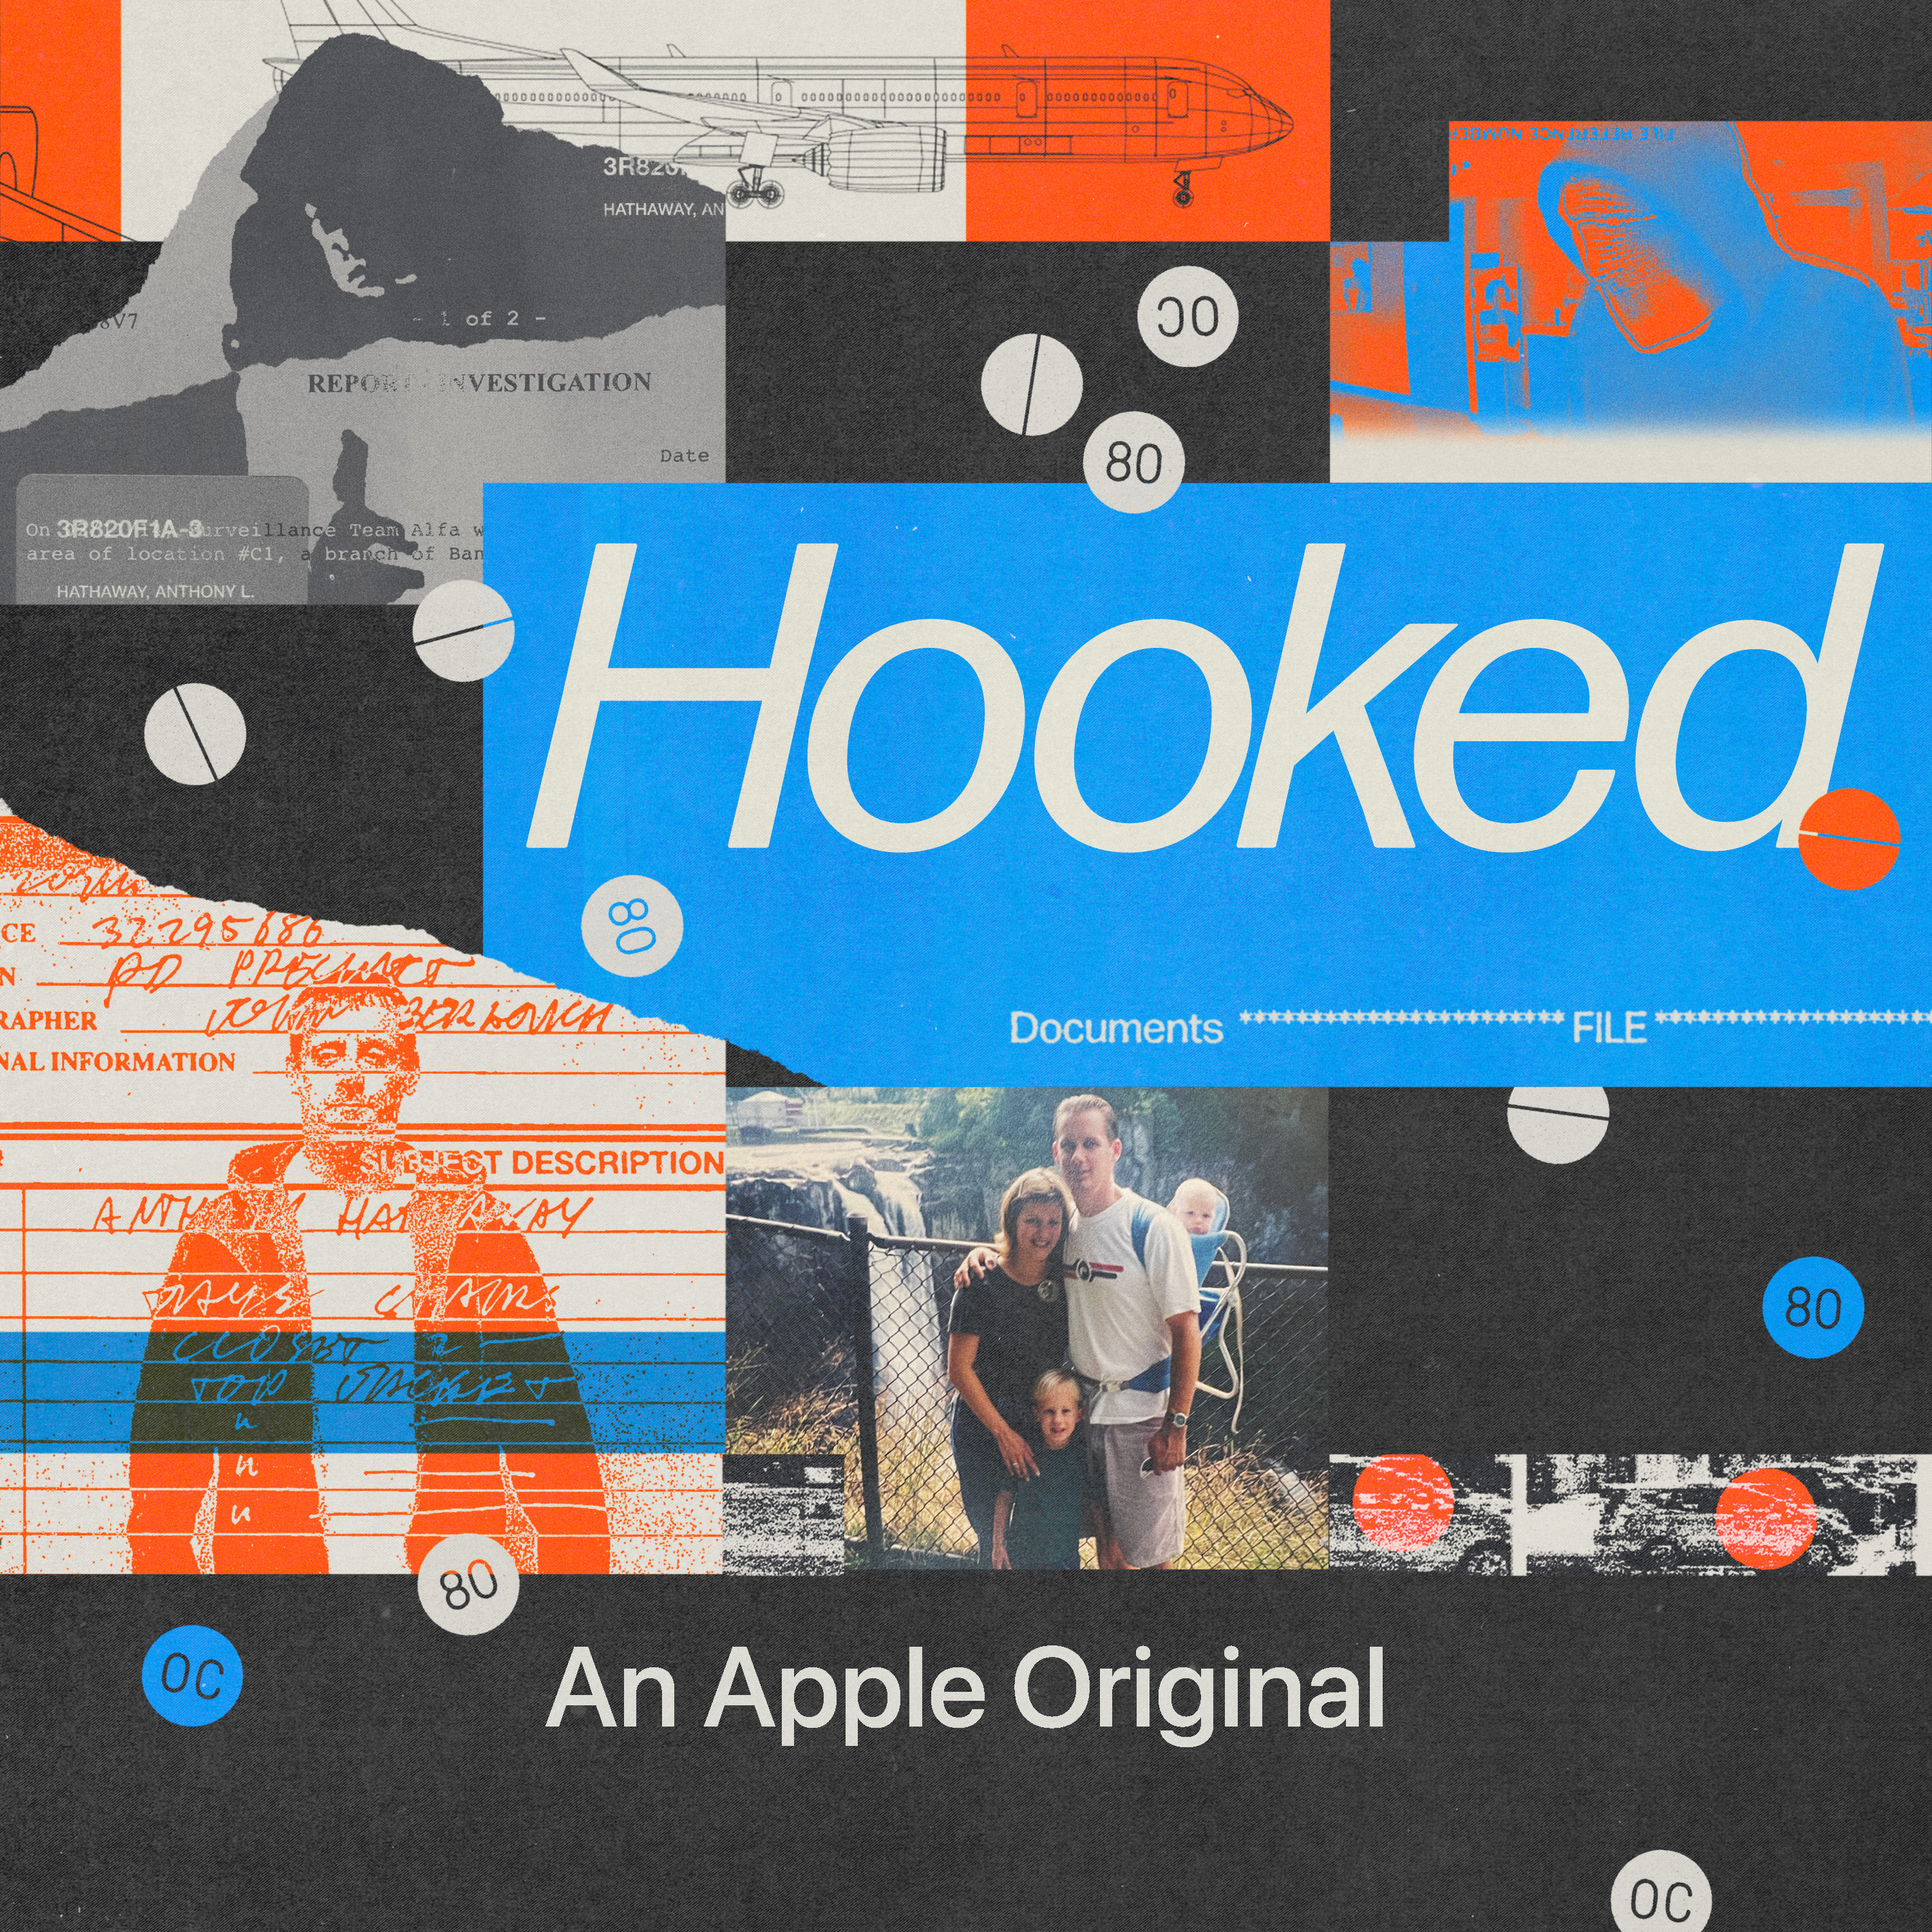 Apple debuts original podcast 'Hooked'